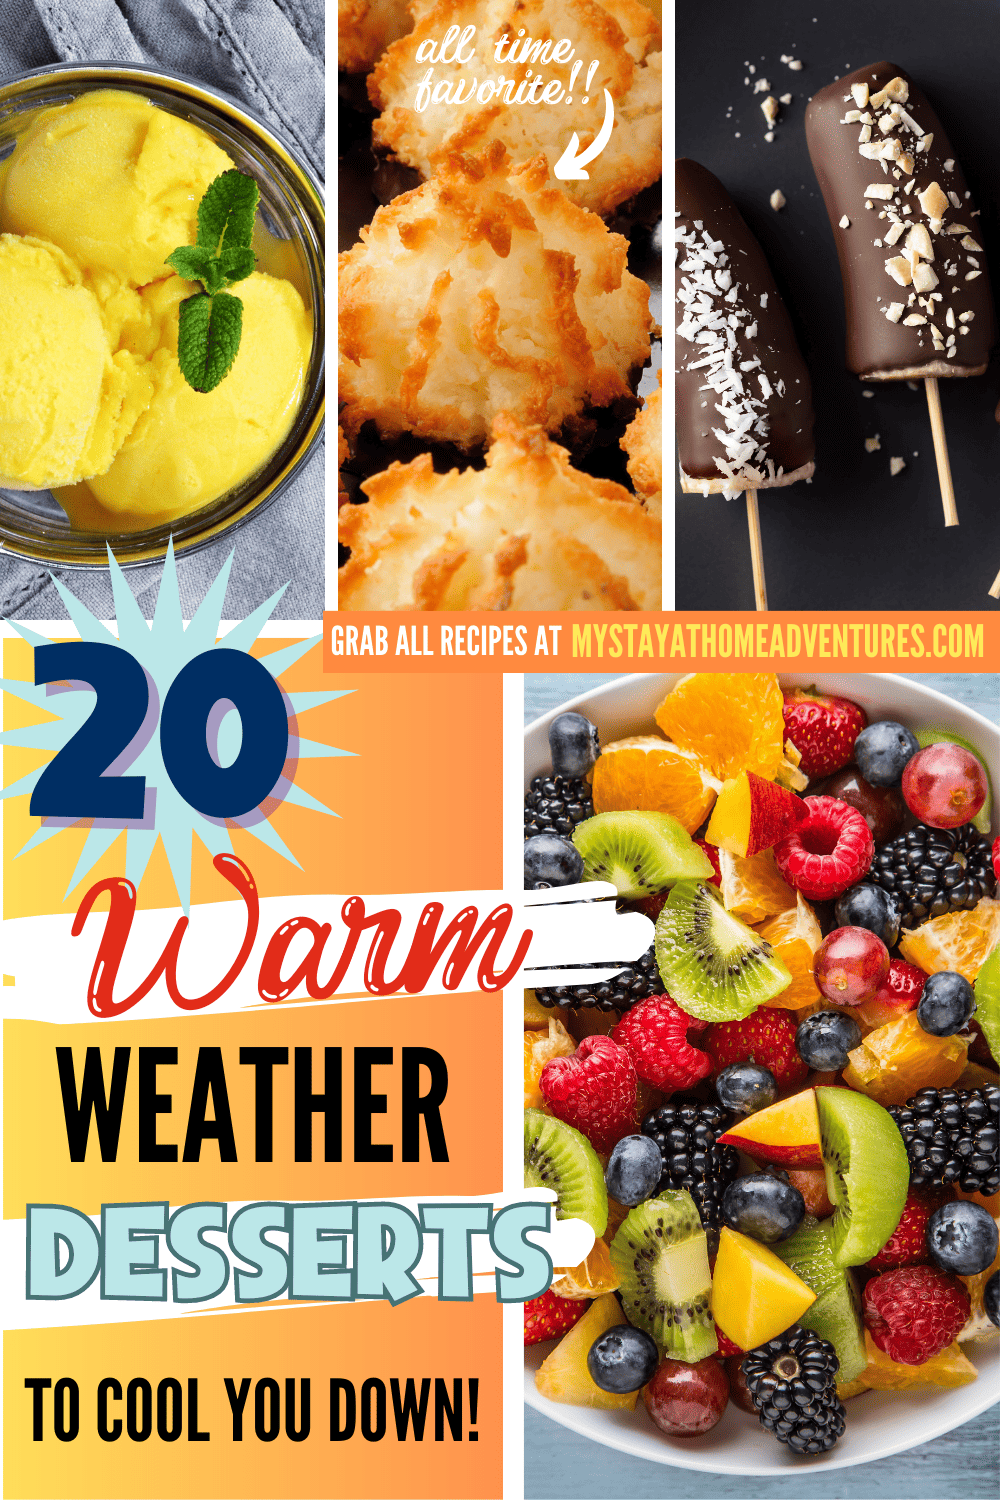 A pinterest image of warm weather desserts with the text - 20 Warm Weather Desserts to Cool You Down! The site's link is also included in the image.